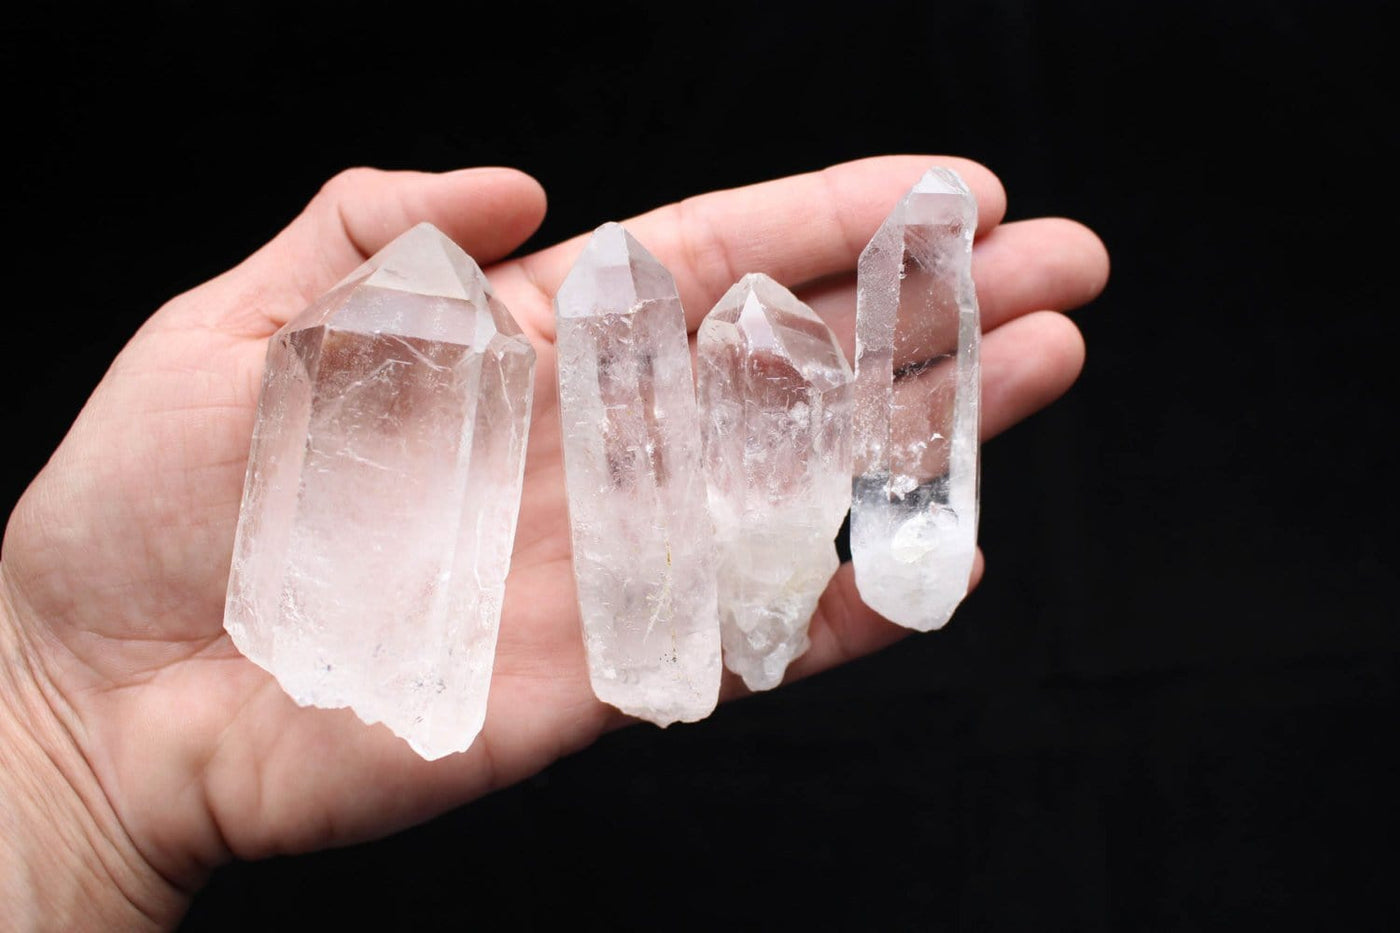 Four Crystal Point 5-8cm on hand for size comparison 